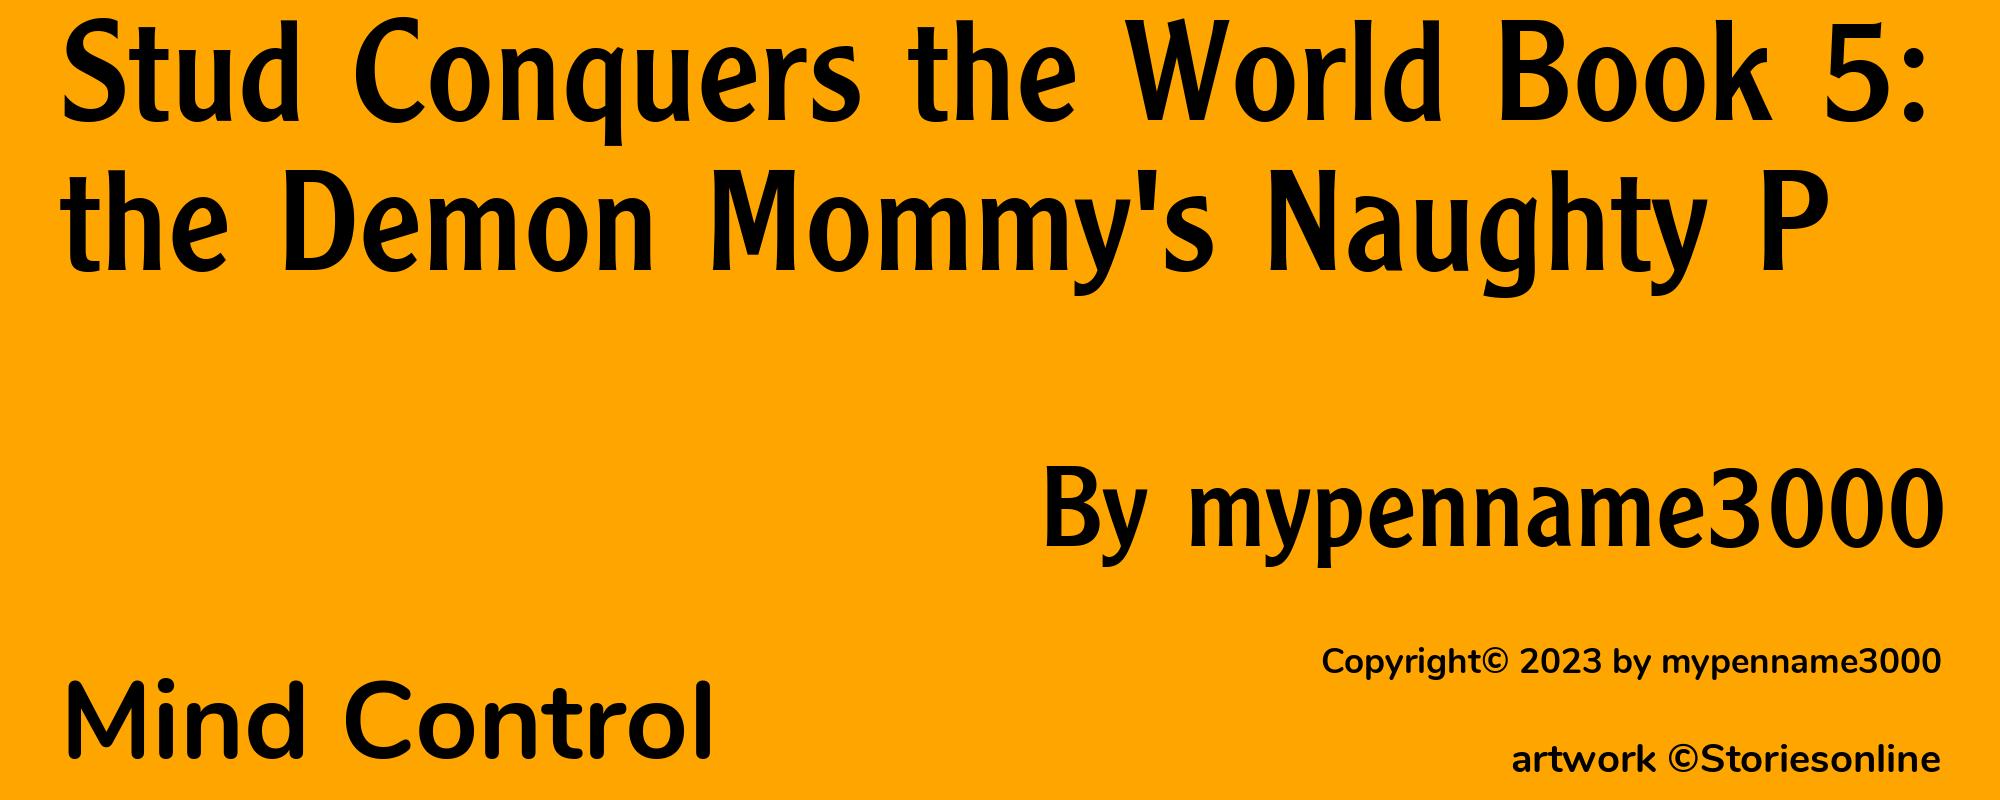 Stud Conquers the World Book 5: the Demon Mommy's Naughty P - Cover